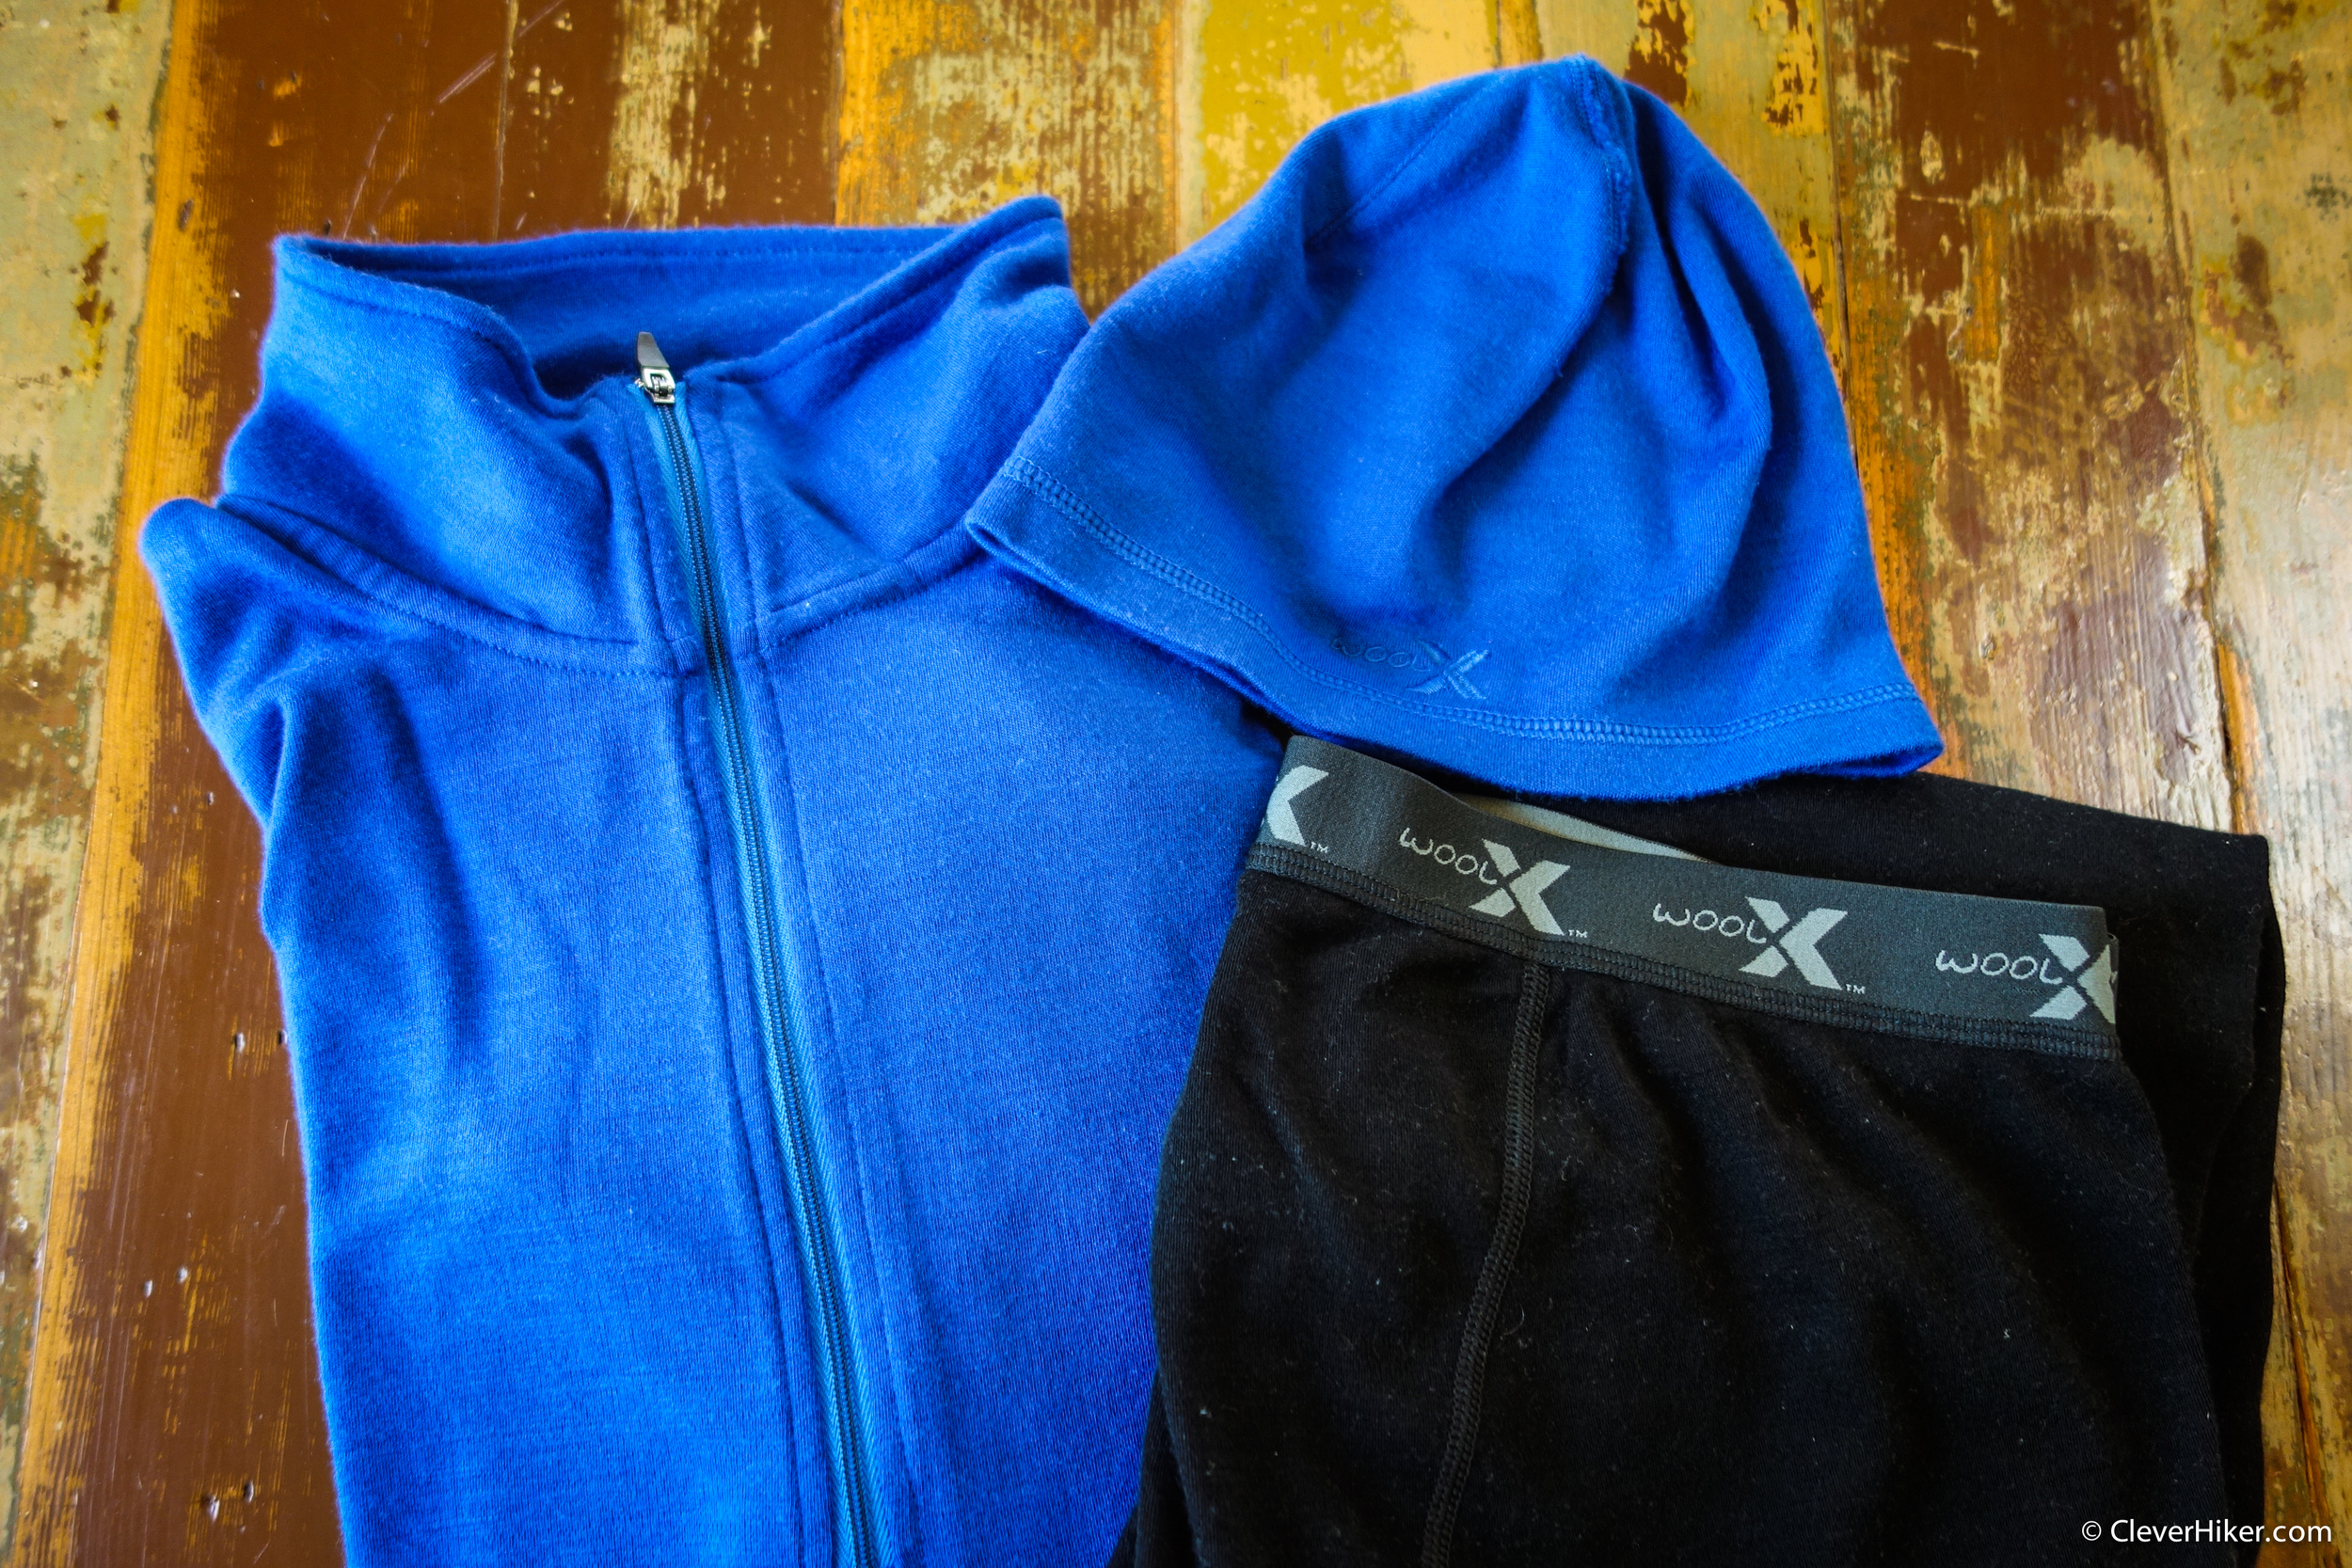 Woolx Review – Quality Merino Wool Clothing